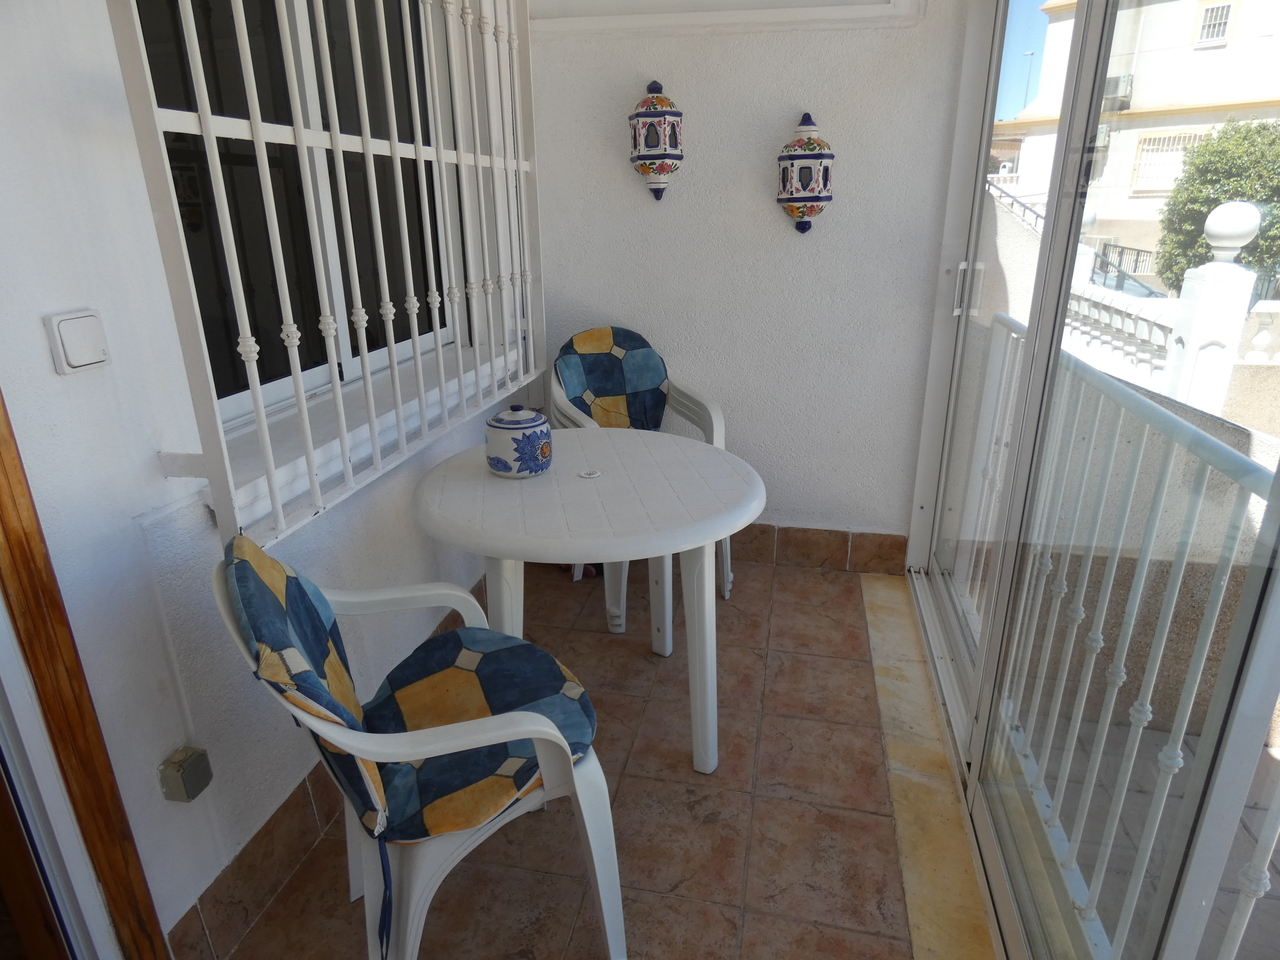 HCB-598: Townhouse for sale in Algorfa